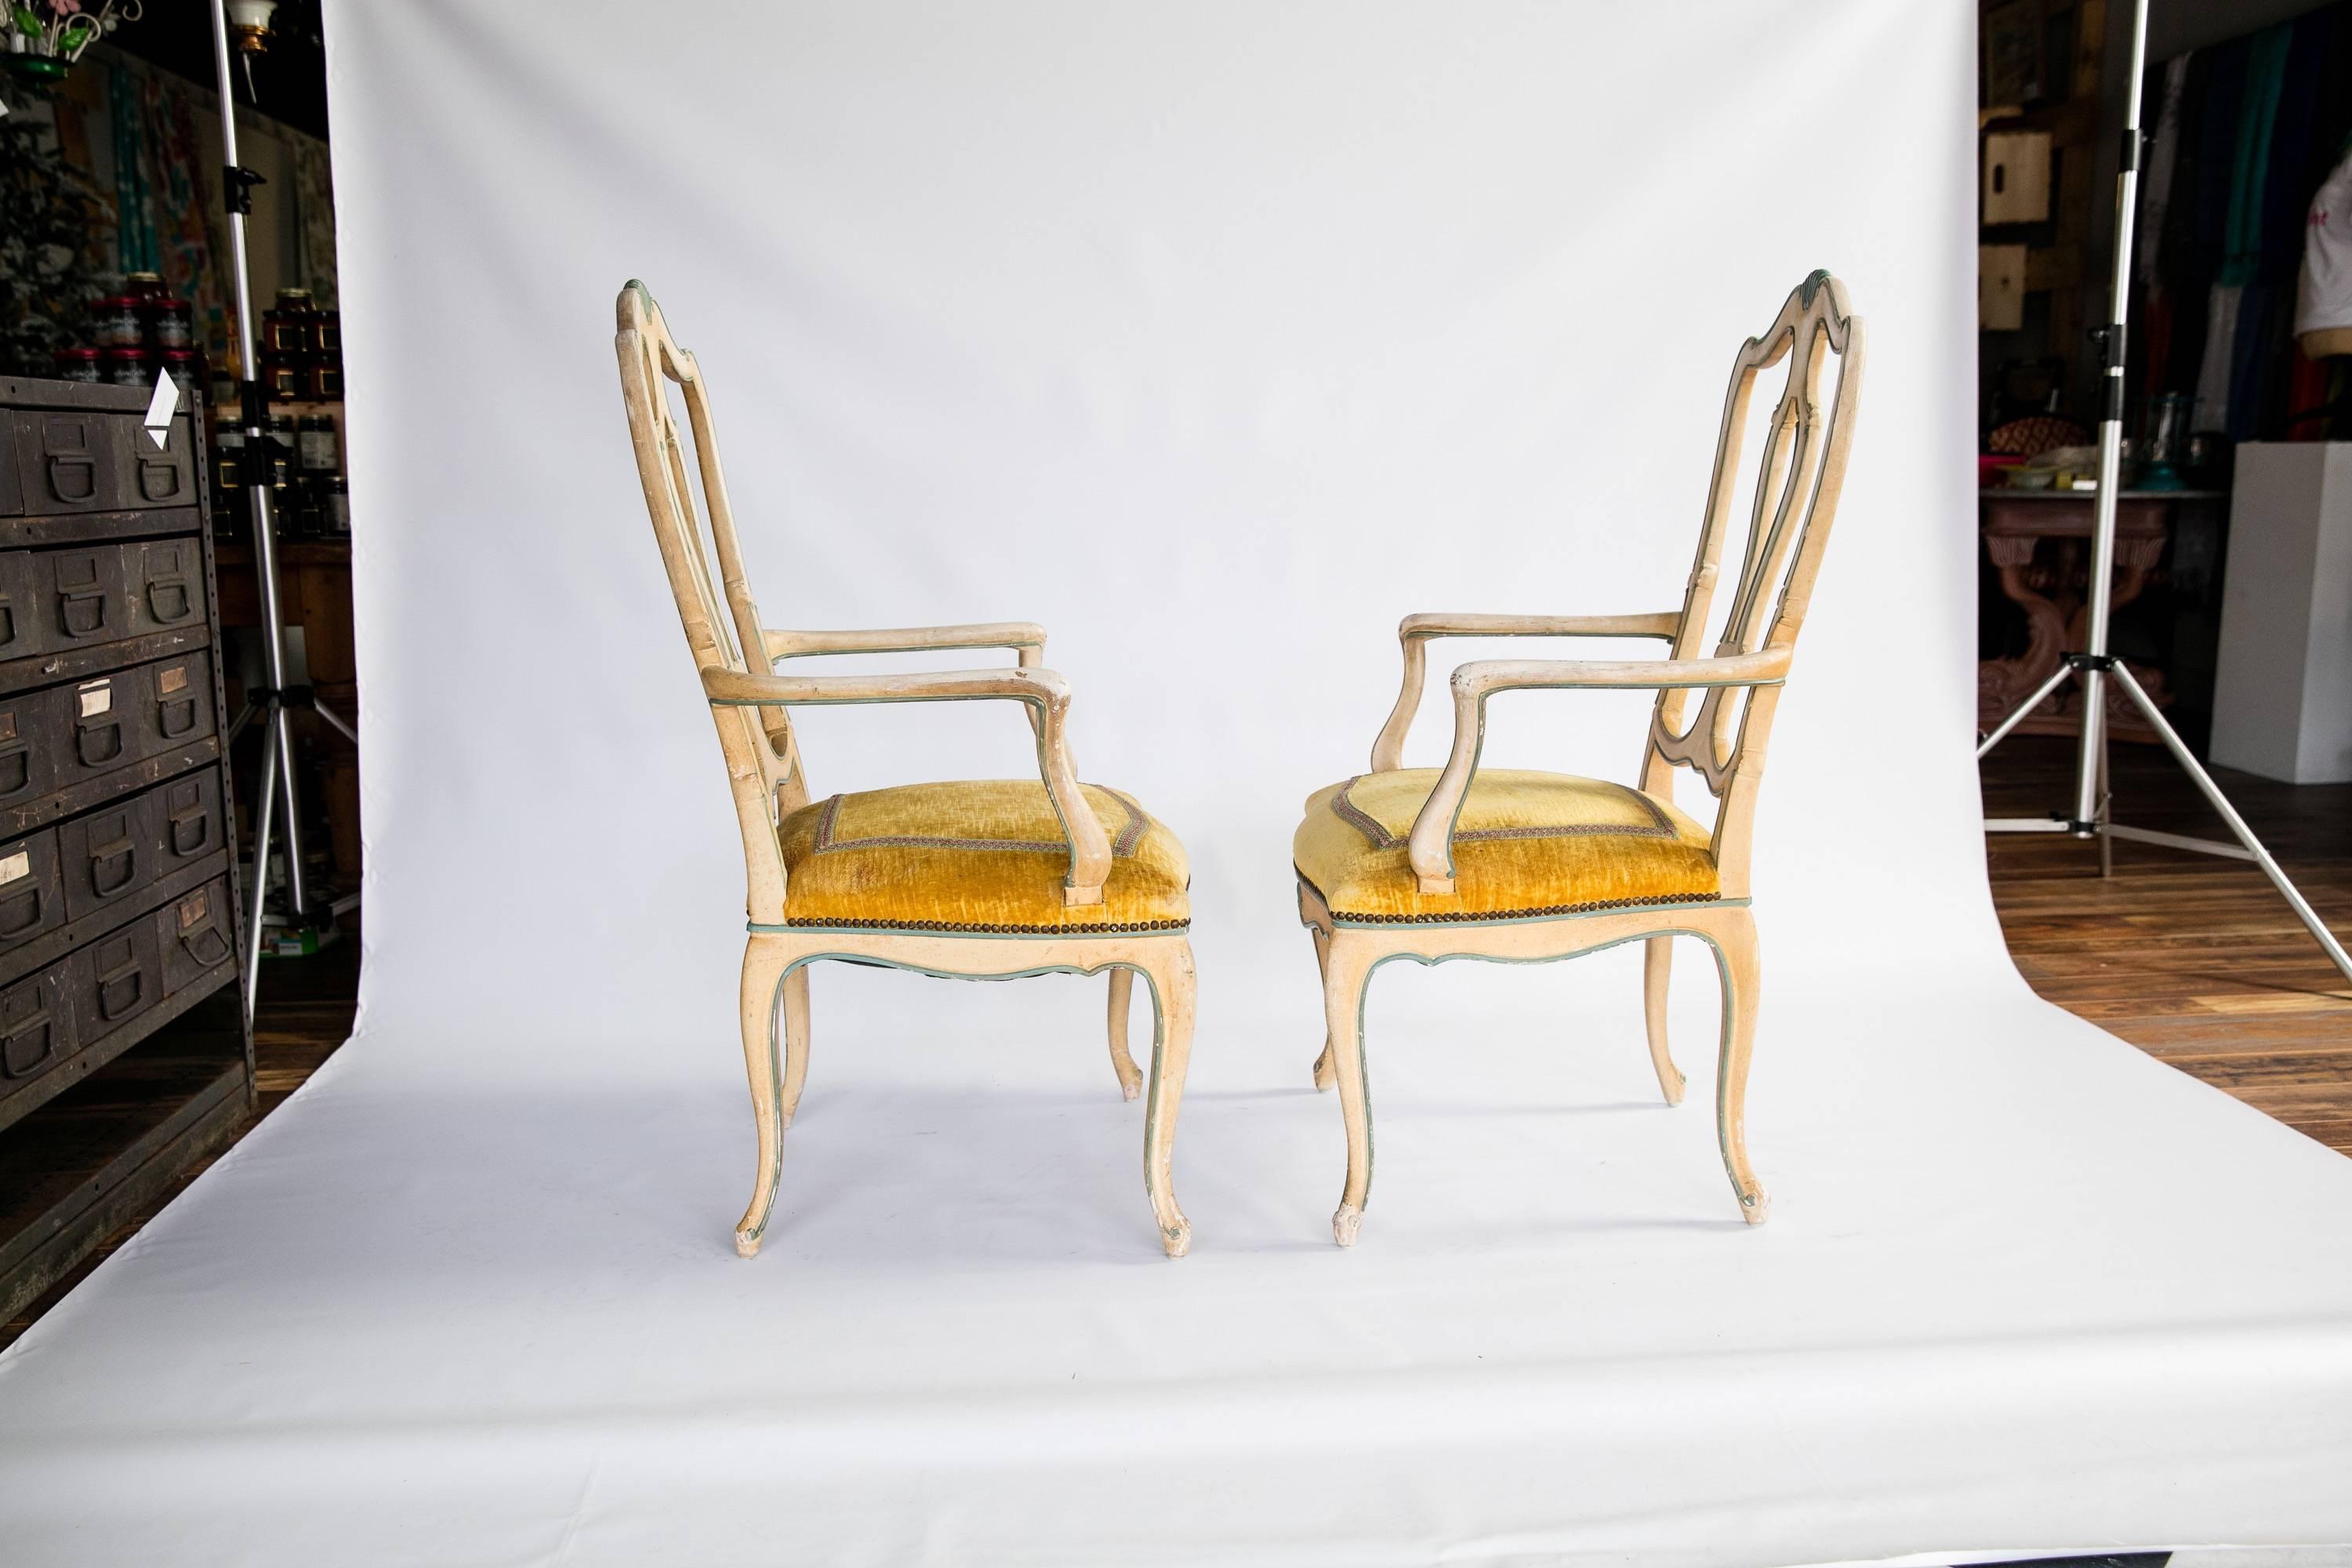 Rococo Baker Furniture Venetian Style Chairs with Velvet Seats and Shell Motif, 1960s For Sale